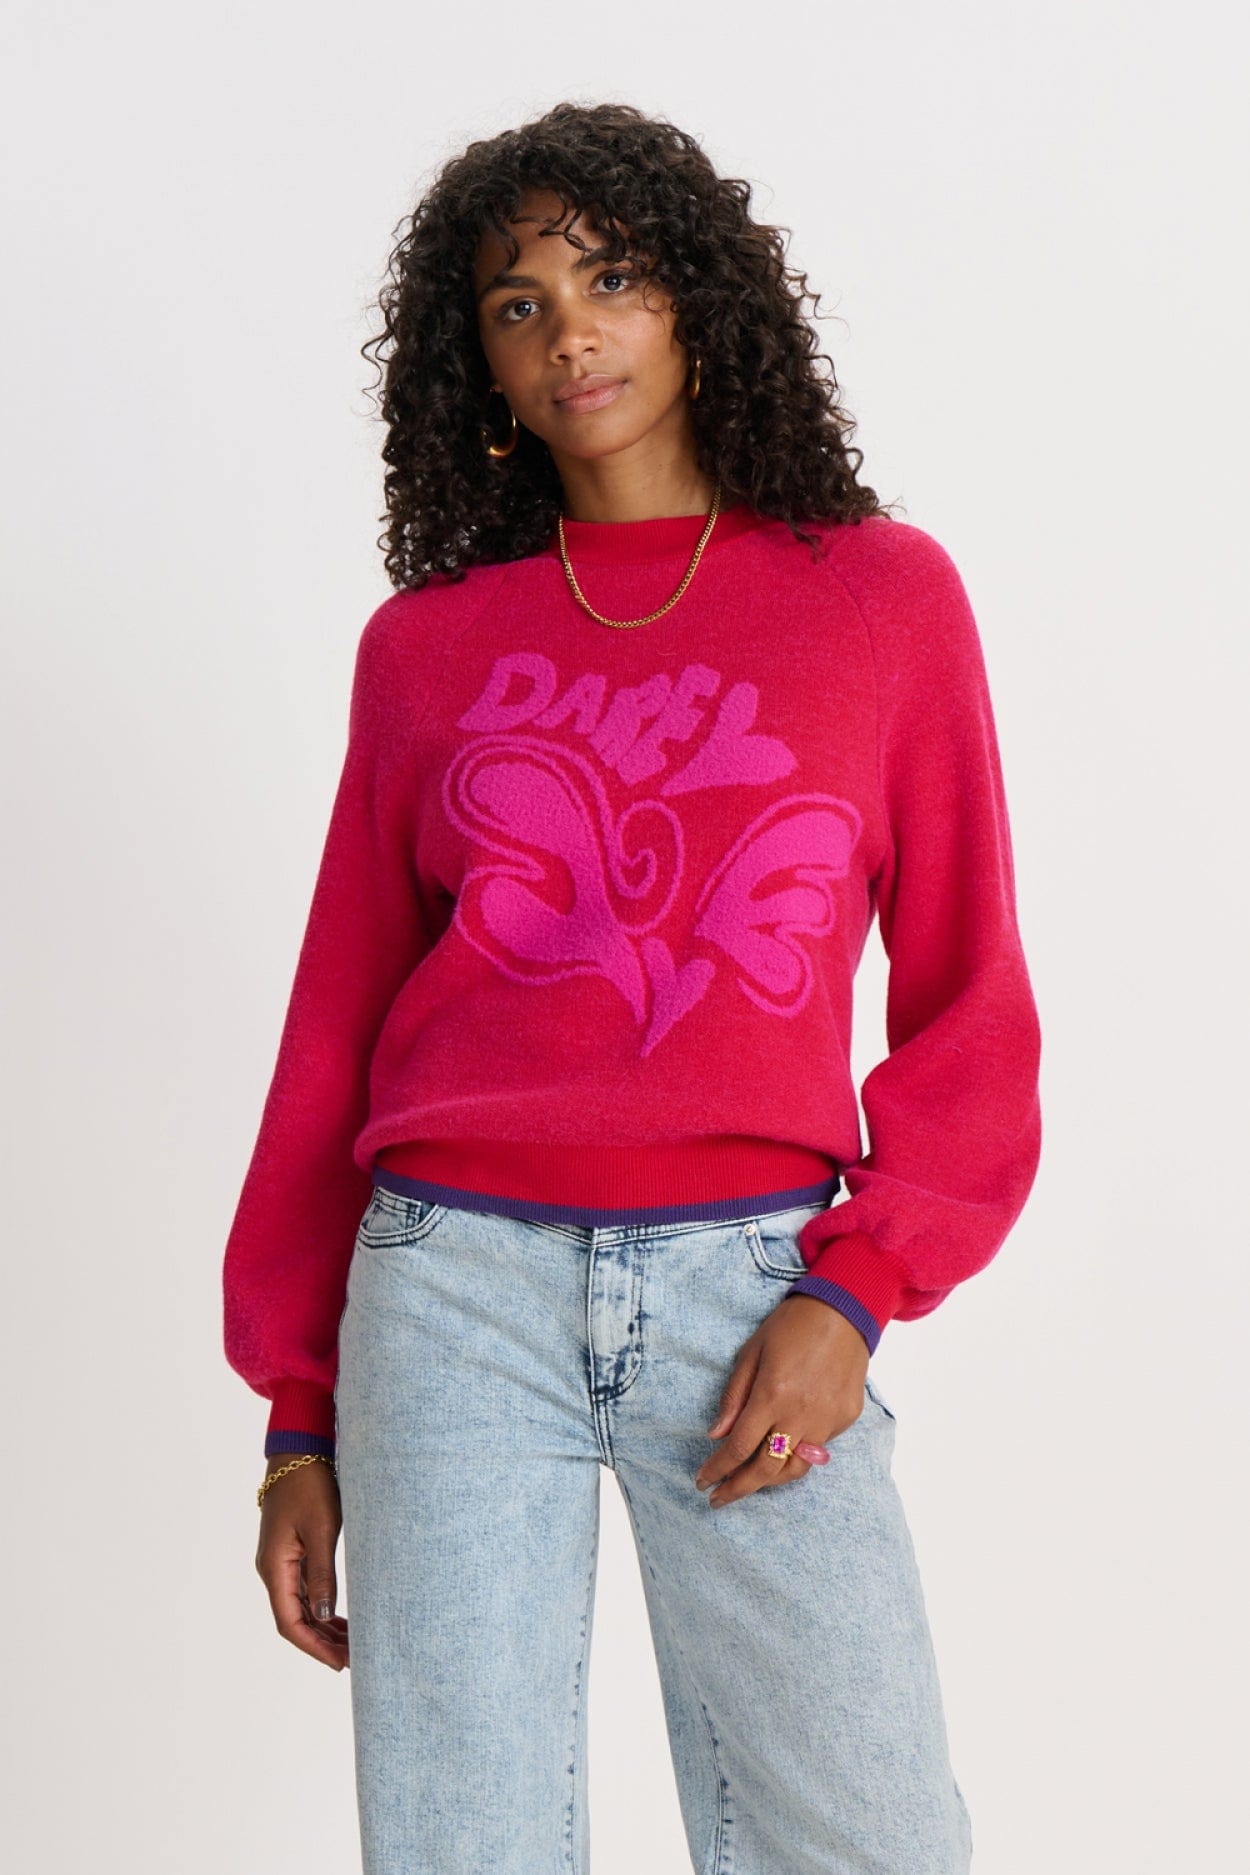 POM Amsterdam Pullovers Red / 34 JUMPER - DARE Scarlet Red